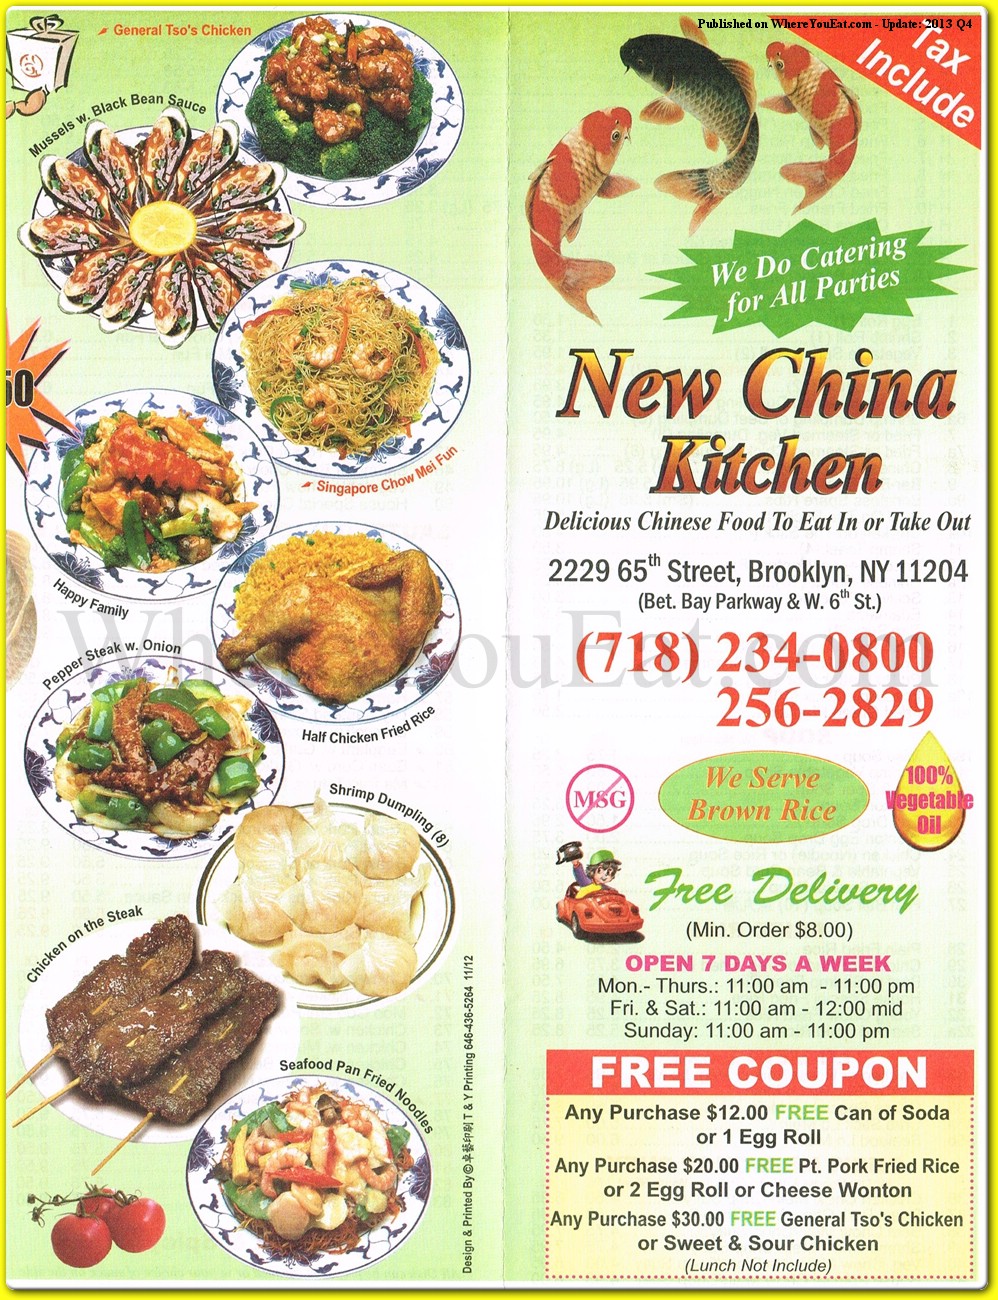 New China Kitchen Restaurant in Brooklyn / Official Menus & Photos